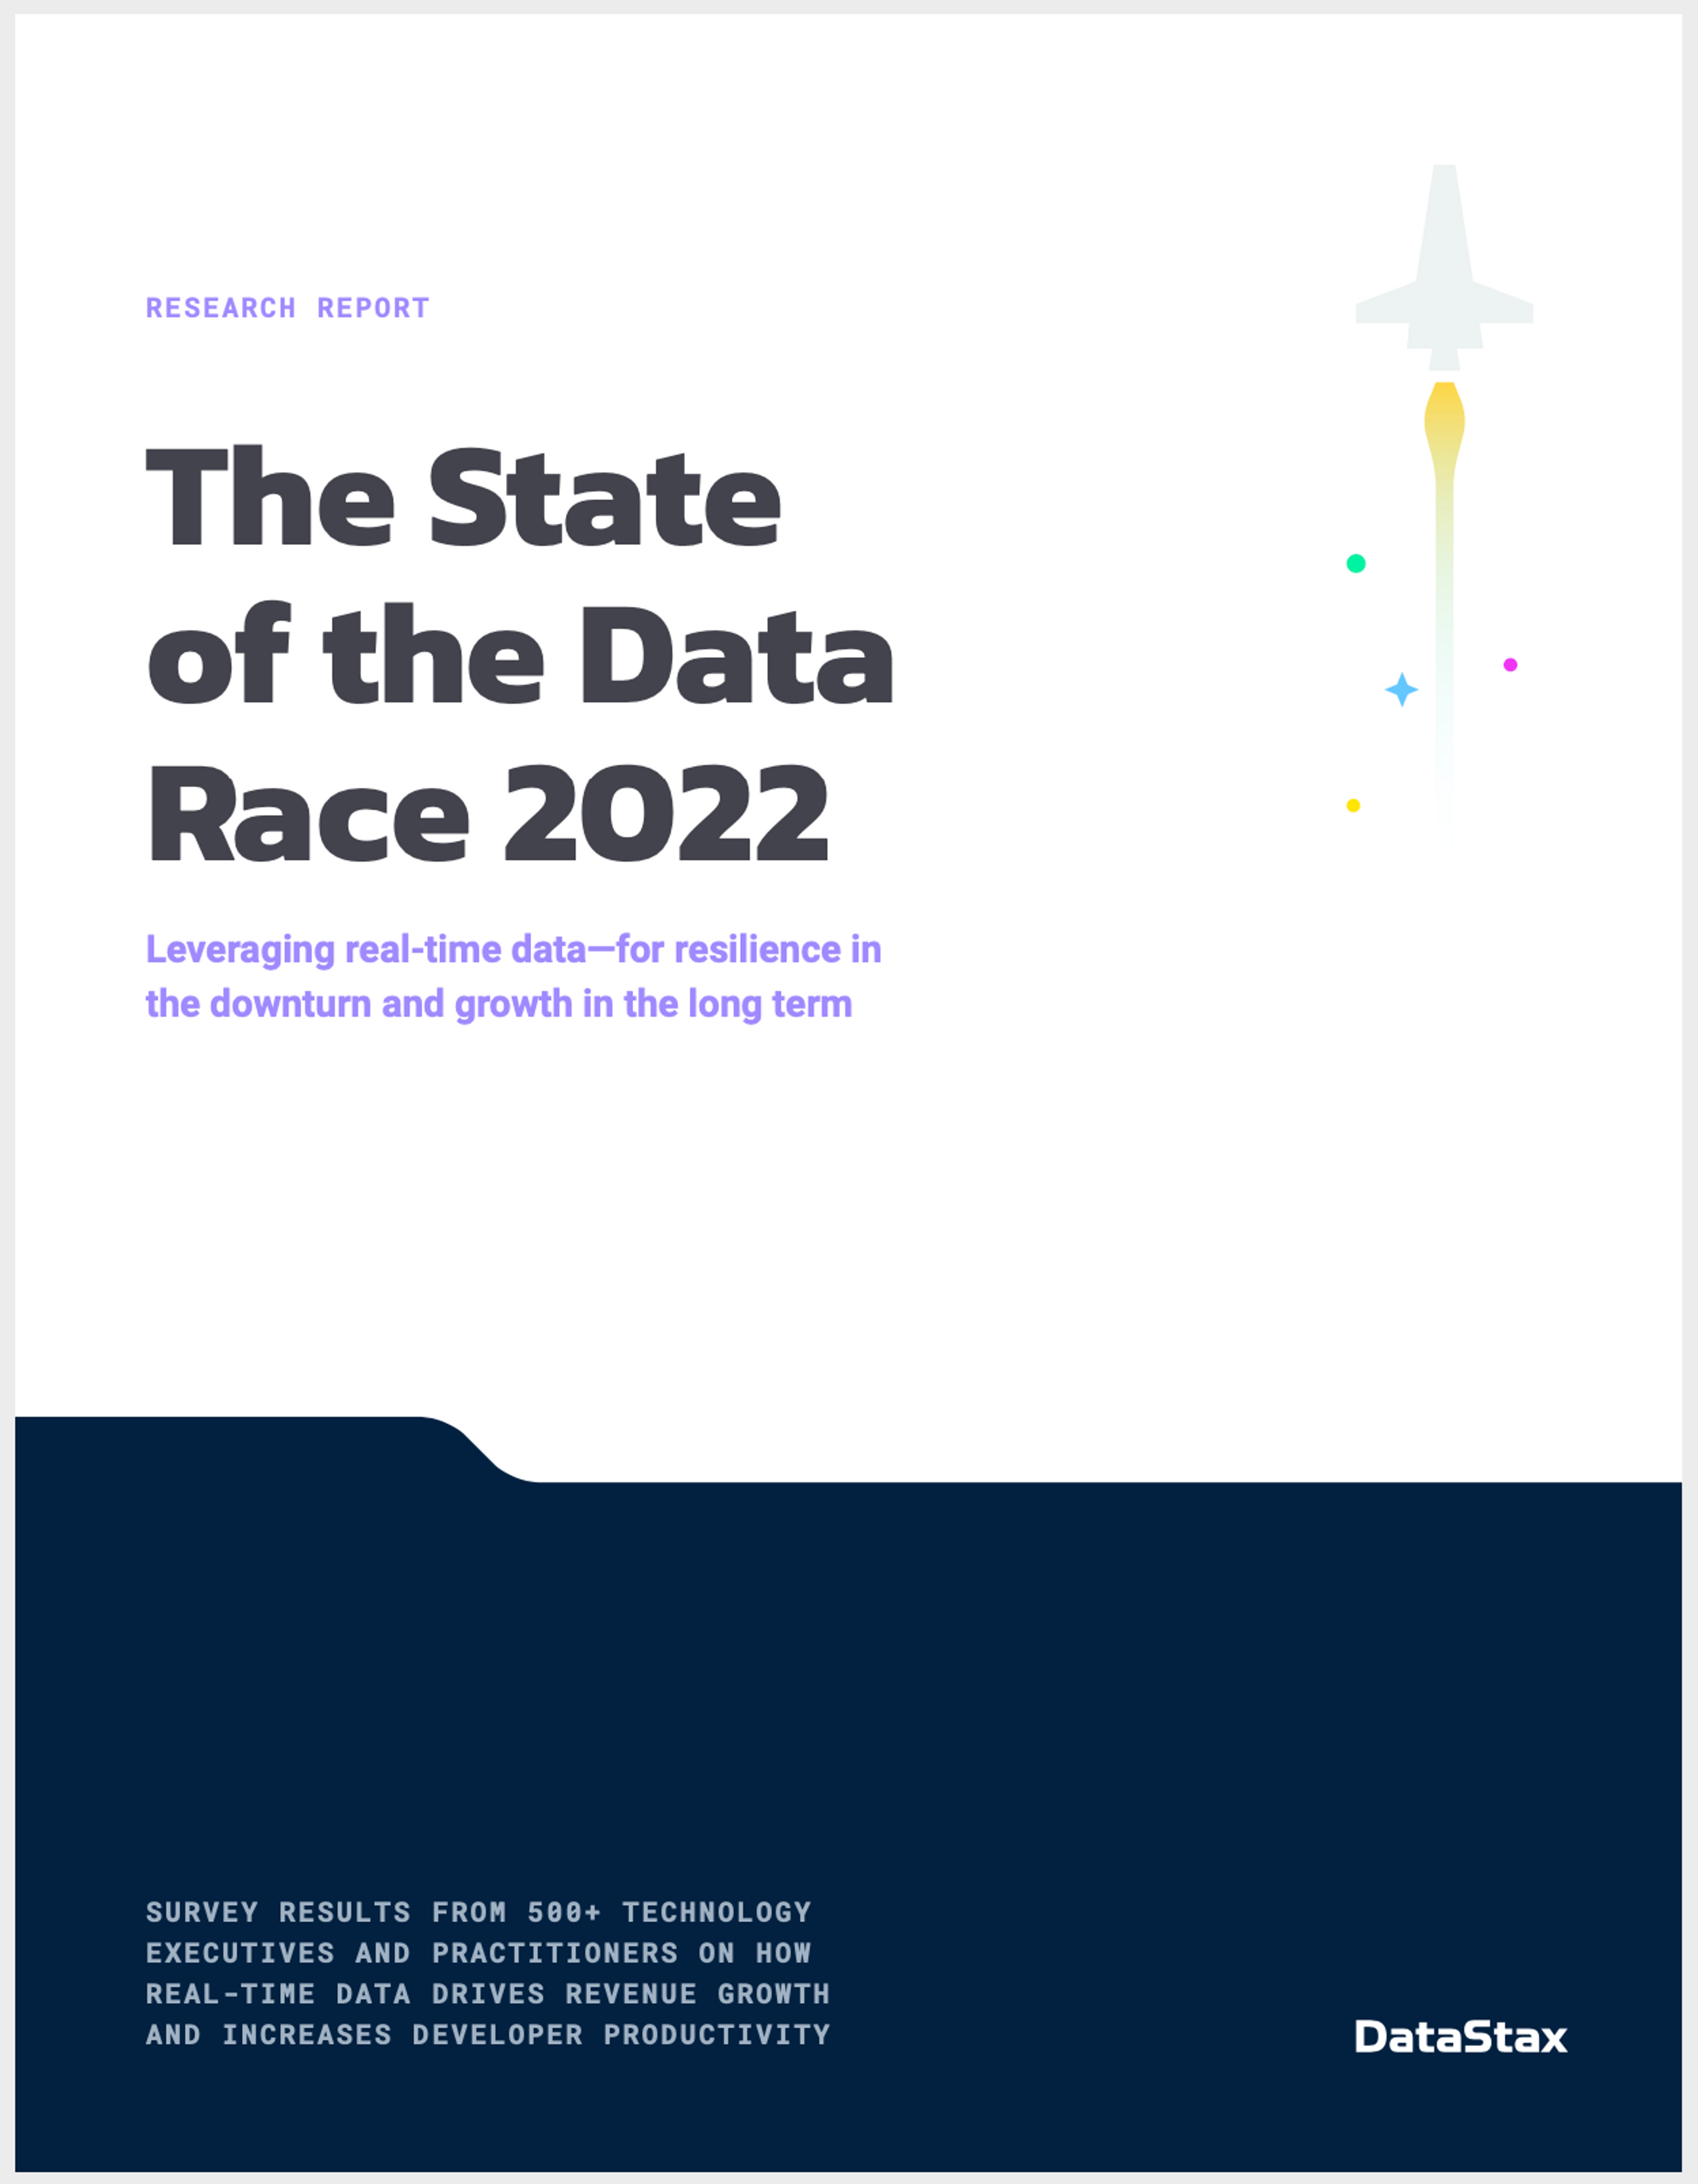 The State of the Data Race 2022